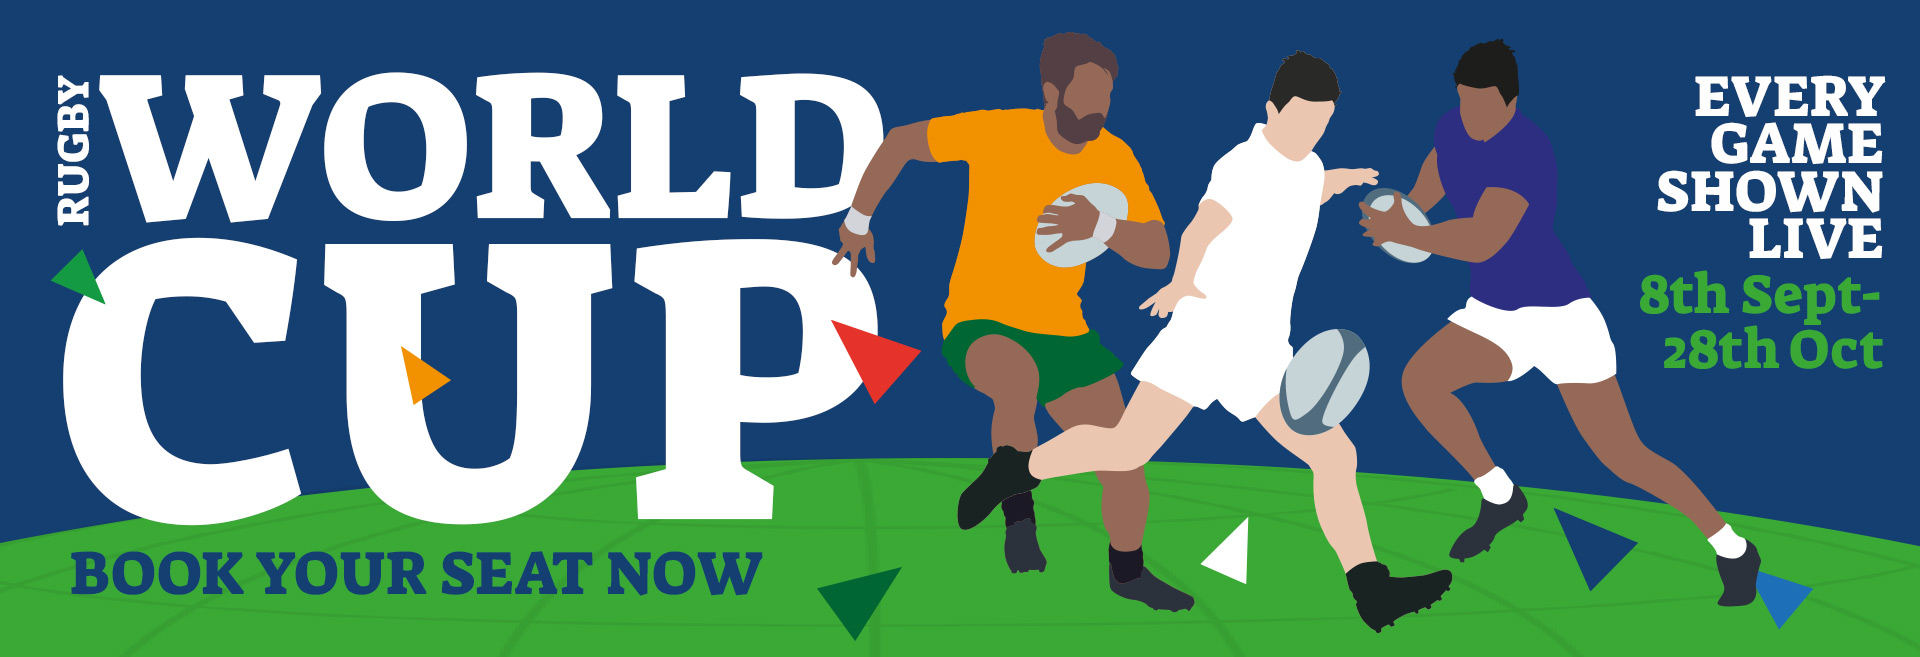 Watch the Rugby World Cup at The Adelphi